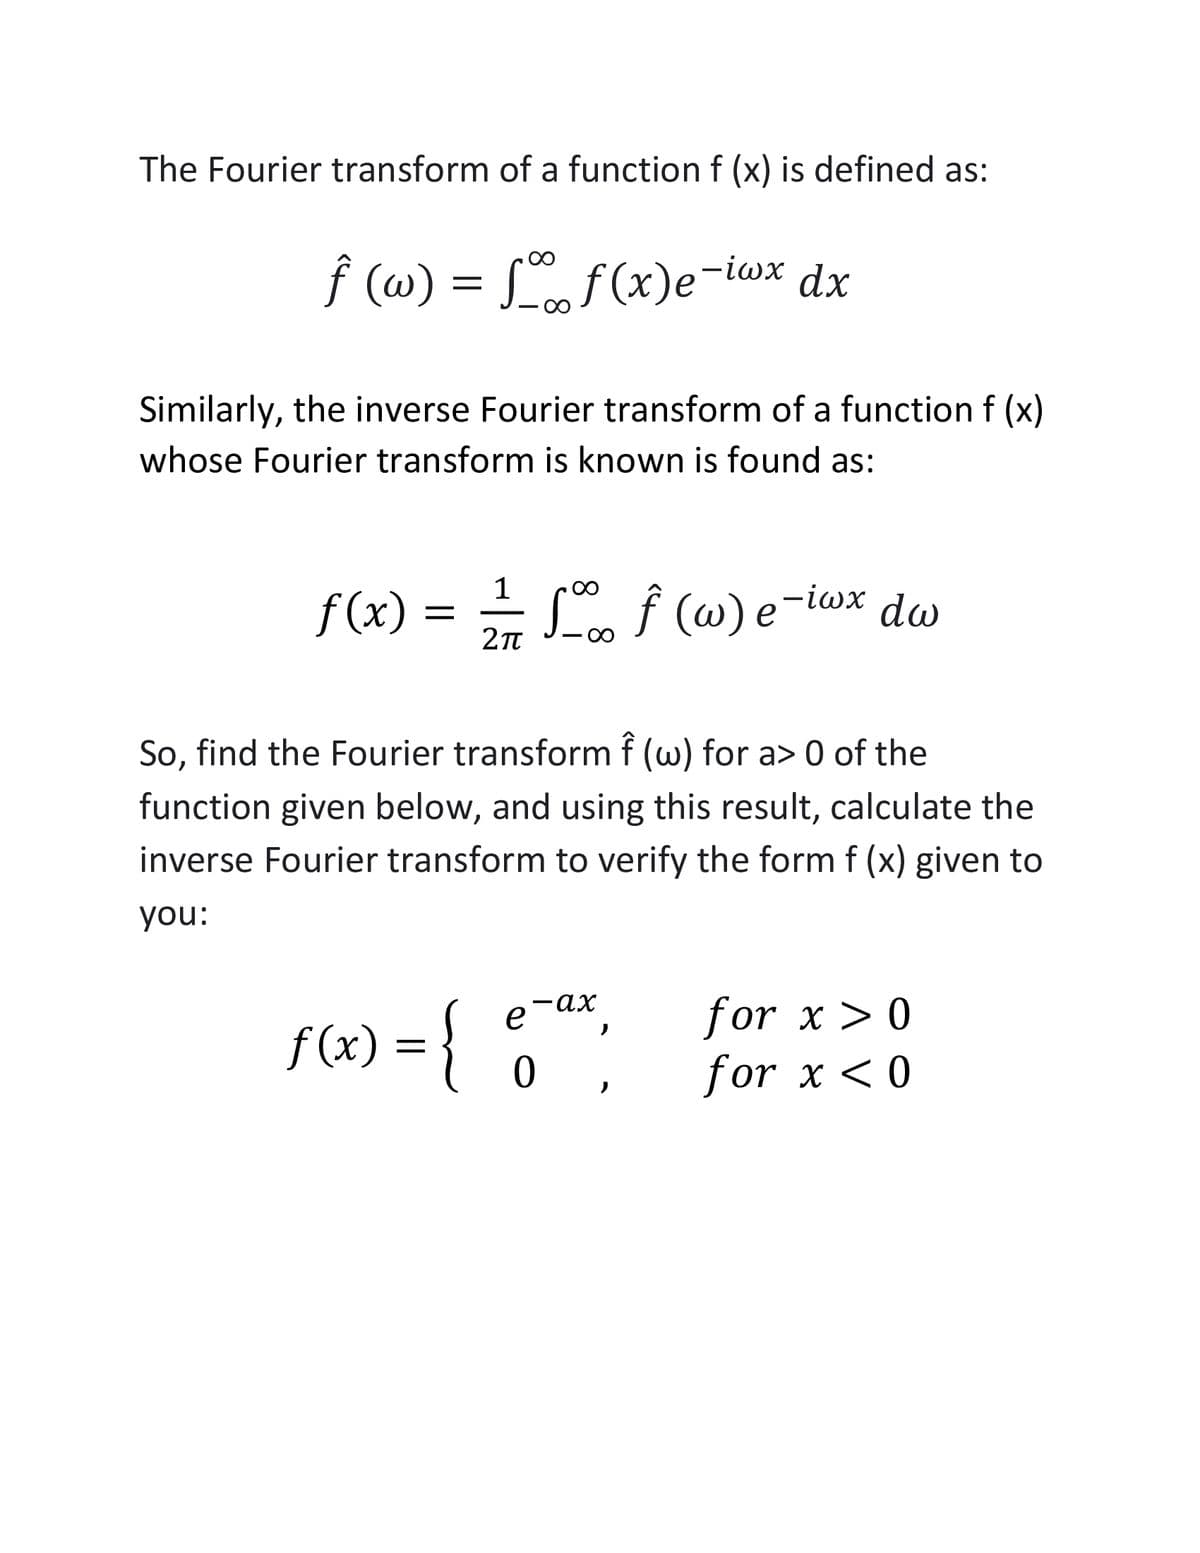 The Fourier transform of a function f (x) is defined as:
f (w) = , f(x)e-iax dx
-iwx dx
Similarly, the inverse Fourier transform of a function f (x)
whose Fourier transform is known is found as:
1
f(x) = L f (@) e-iwx dw
So, find the Fourier transform f (w) for a> 0 of the
function given below, and using this result, calculate the
inverse Fourier transform to verify the form f (x) given to
you:
for x > 0
for x < 0
-ах
f (x) = }
